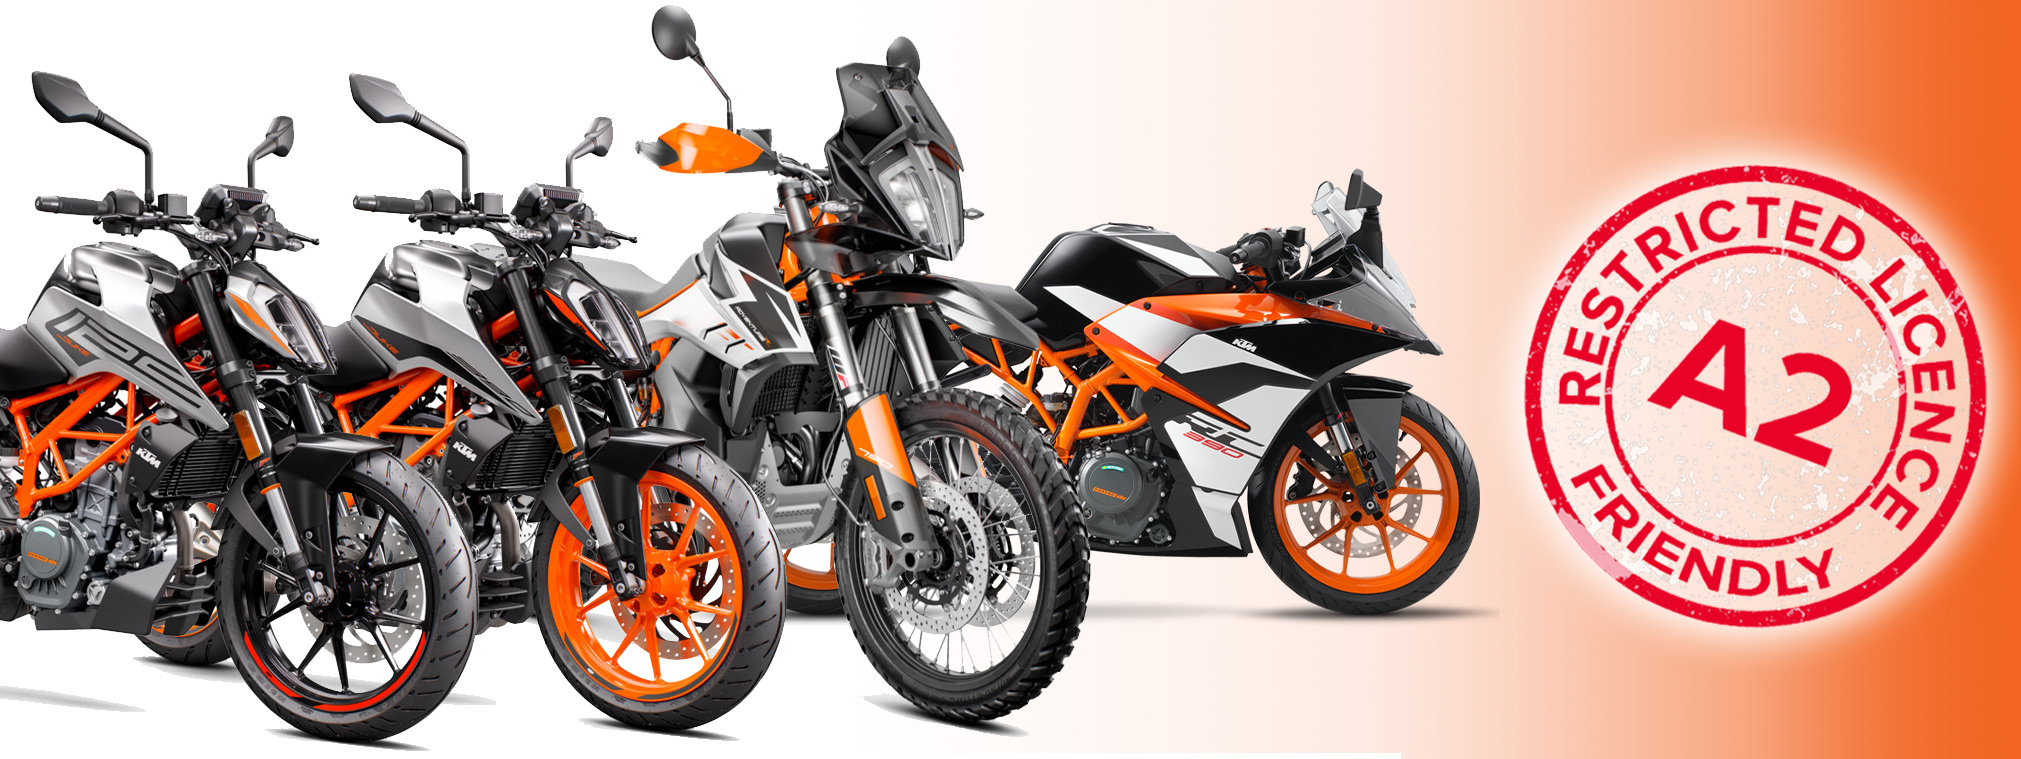 KTM Restricted Licence A2 Friendly